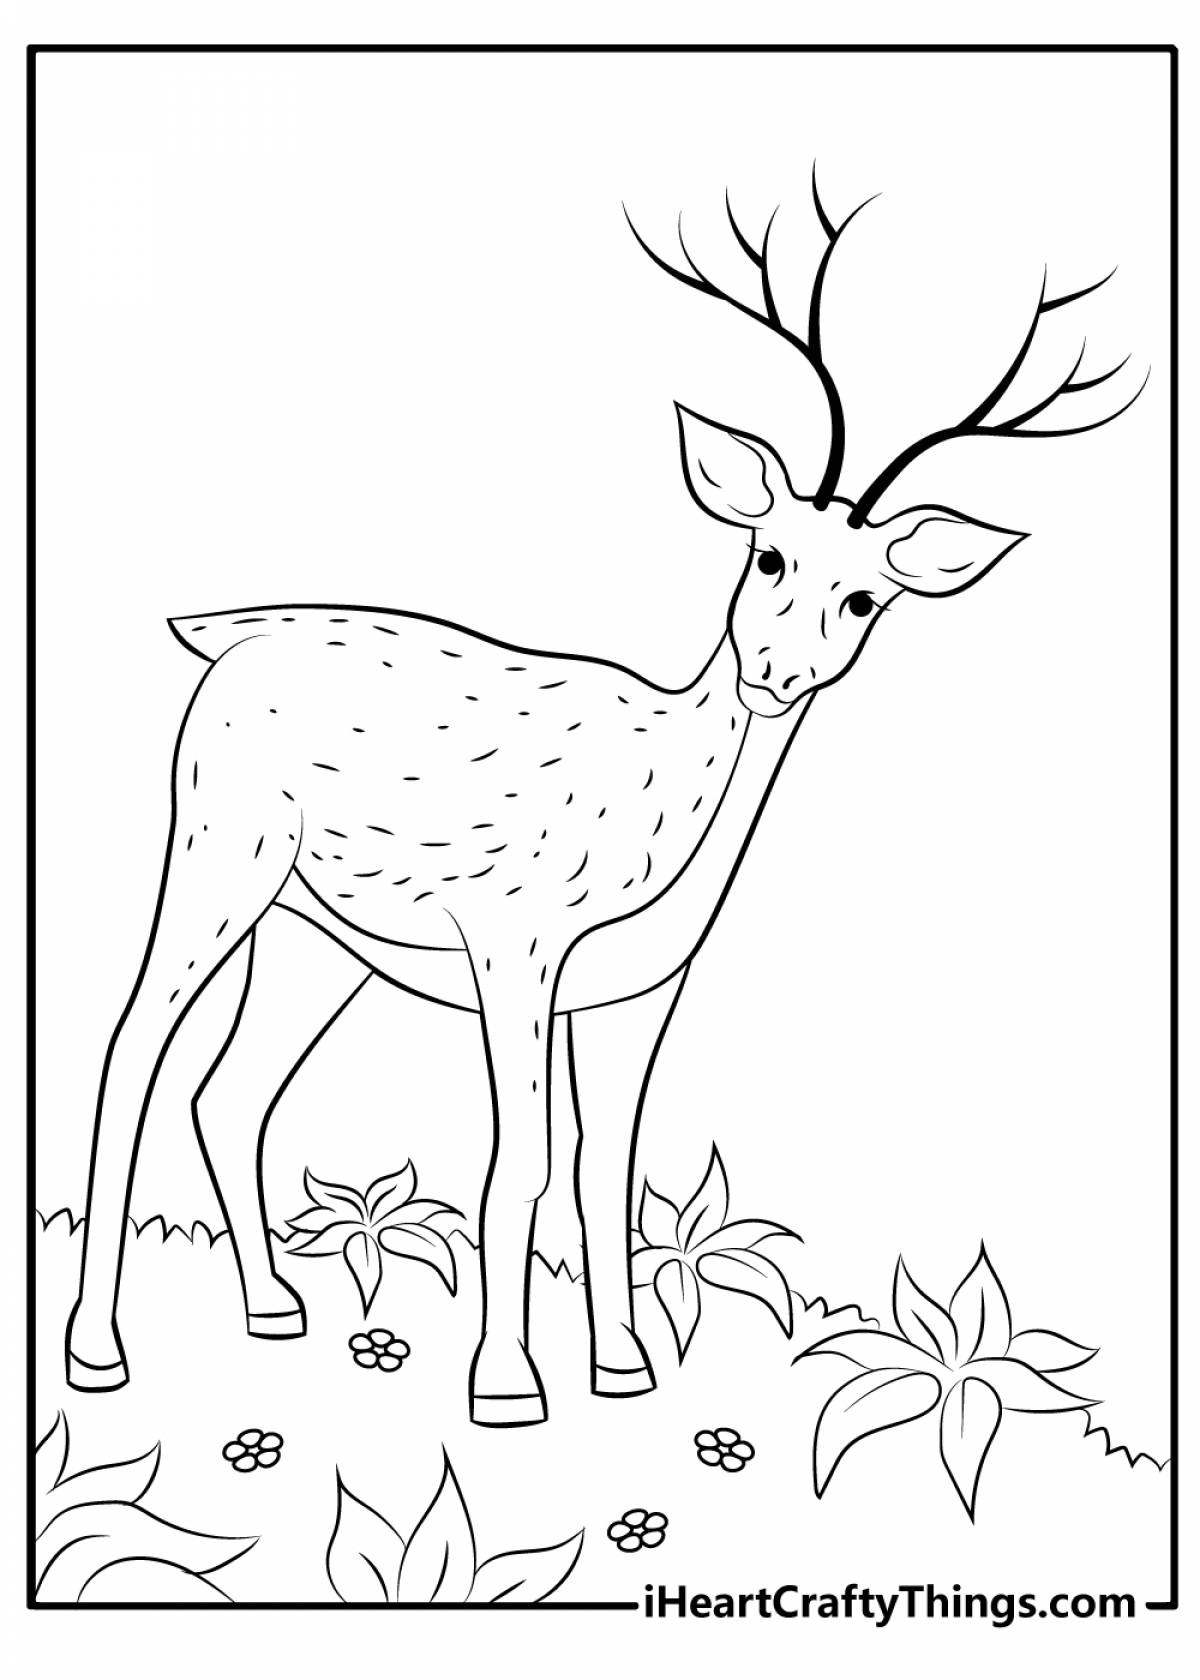 A fun deer coloring book for kids 6-7 years old